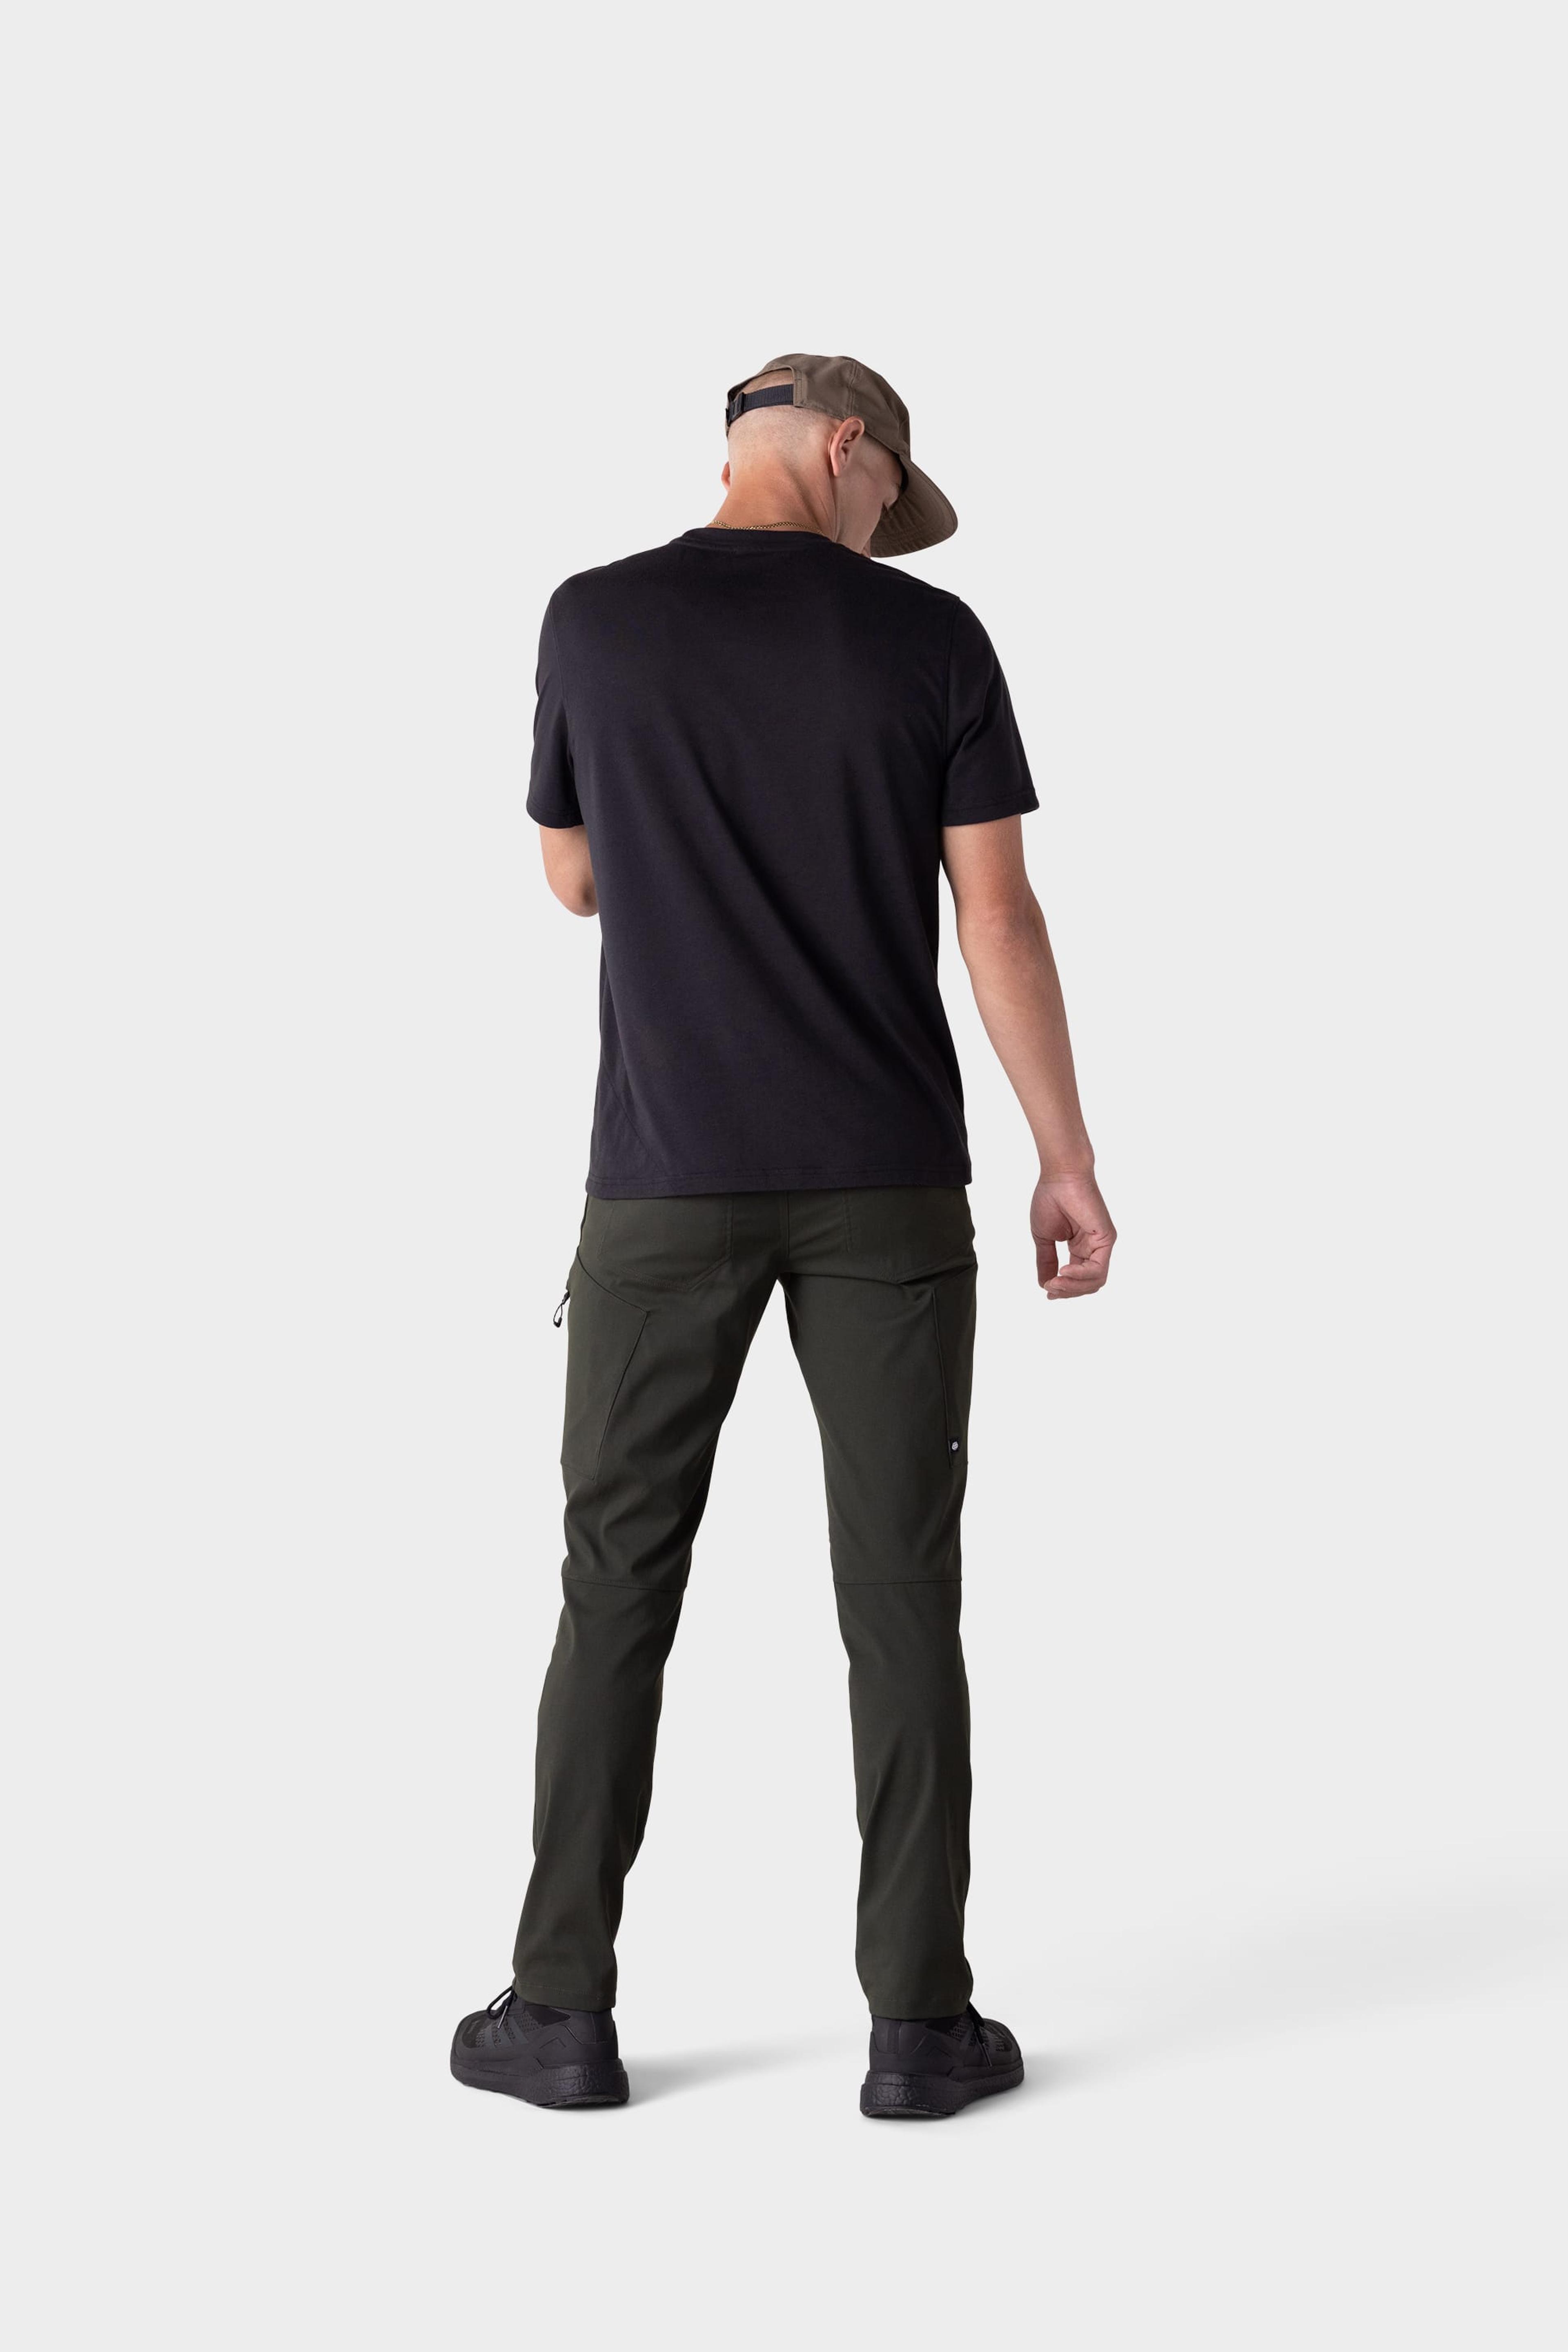 Alternate View 69 of 686 Men's Anything Cargo Pant - Slim Fit